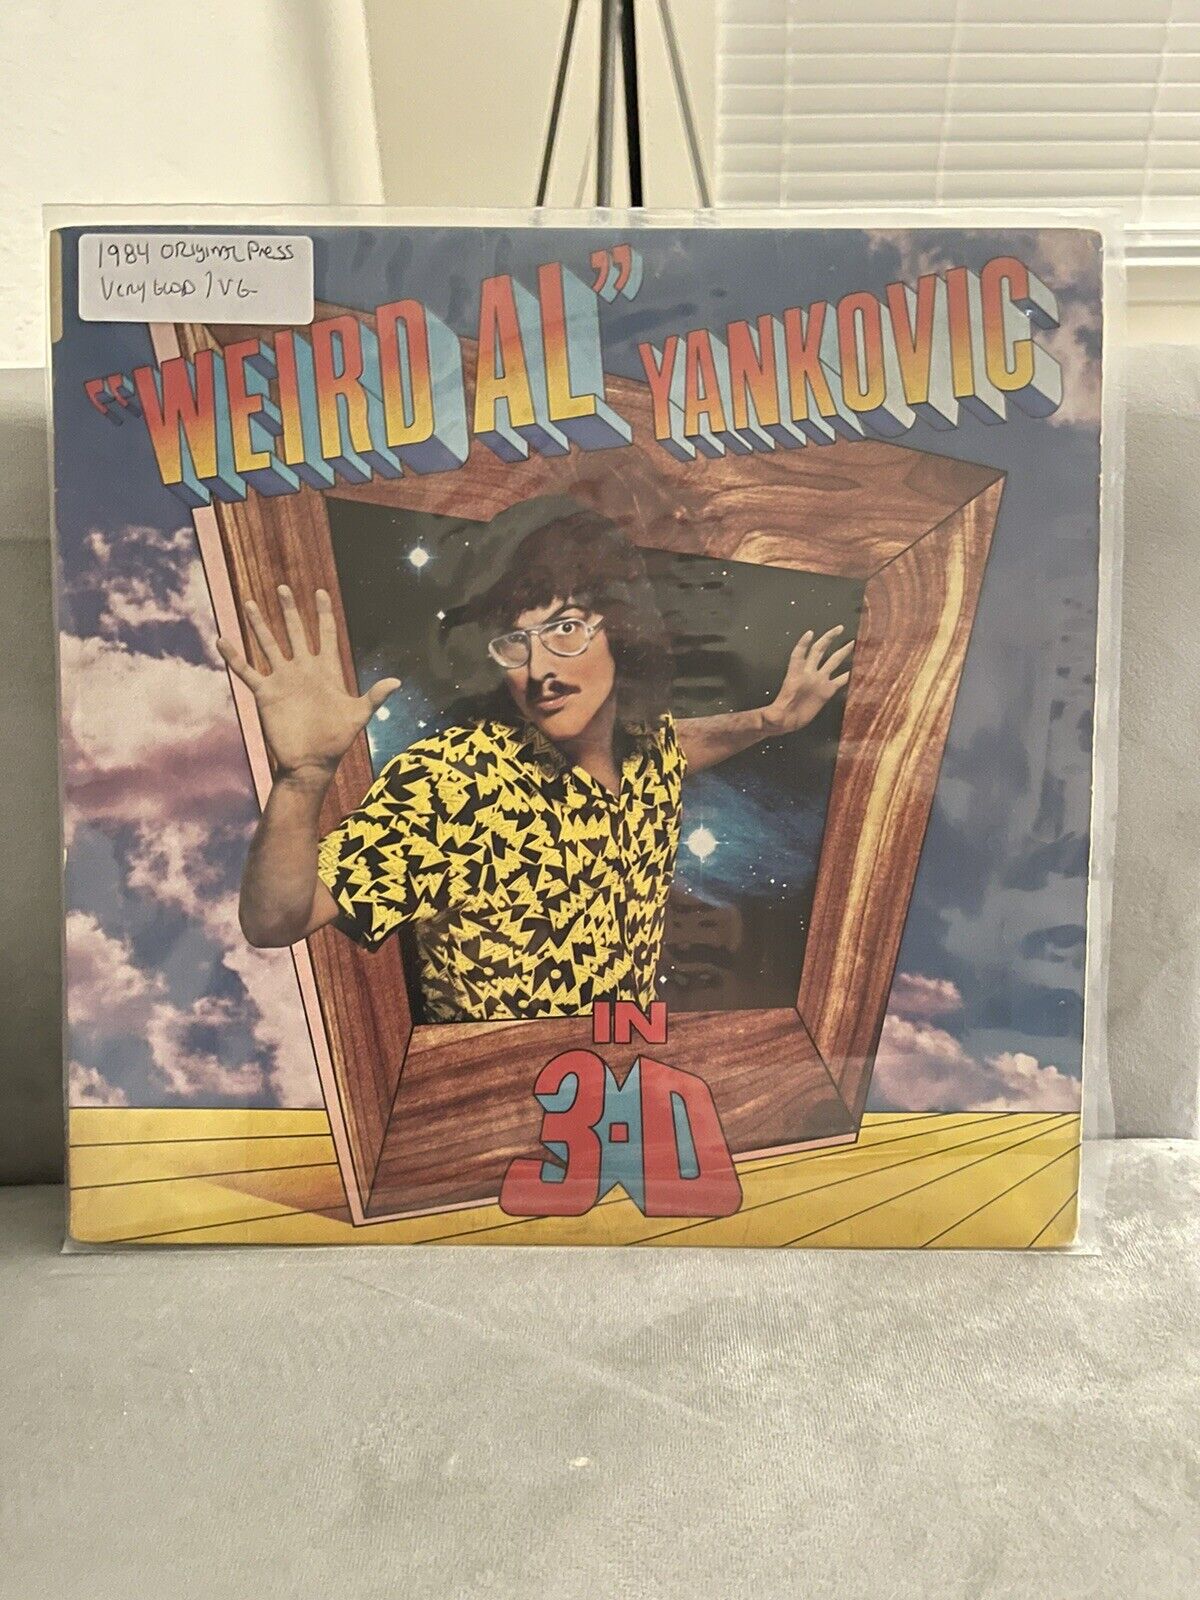 WEIRD ALL RECORD IN 3D